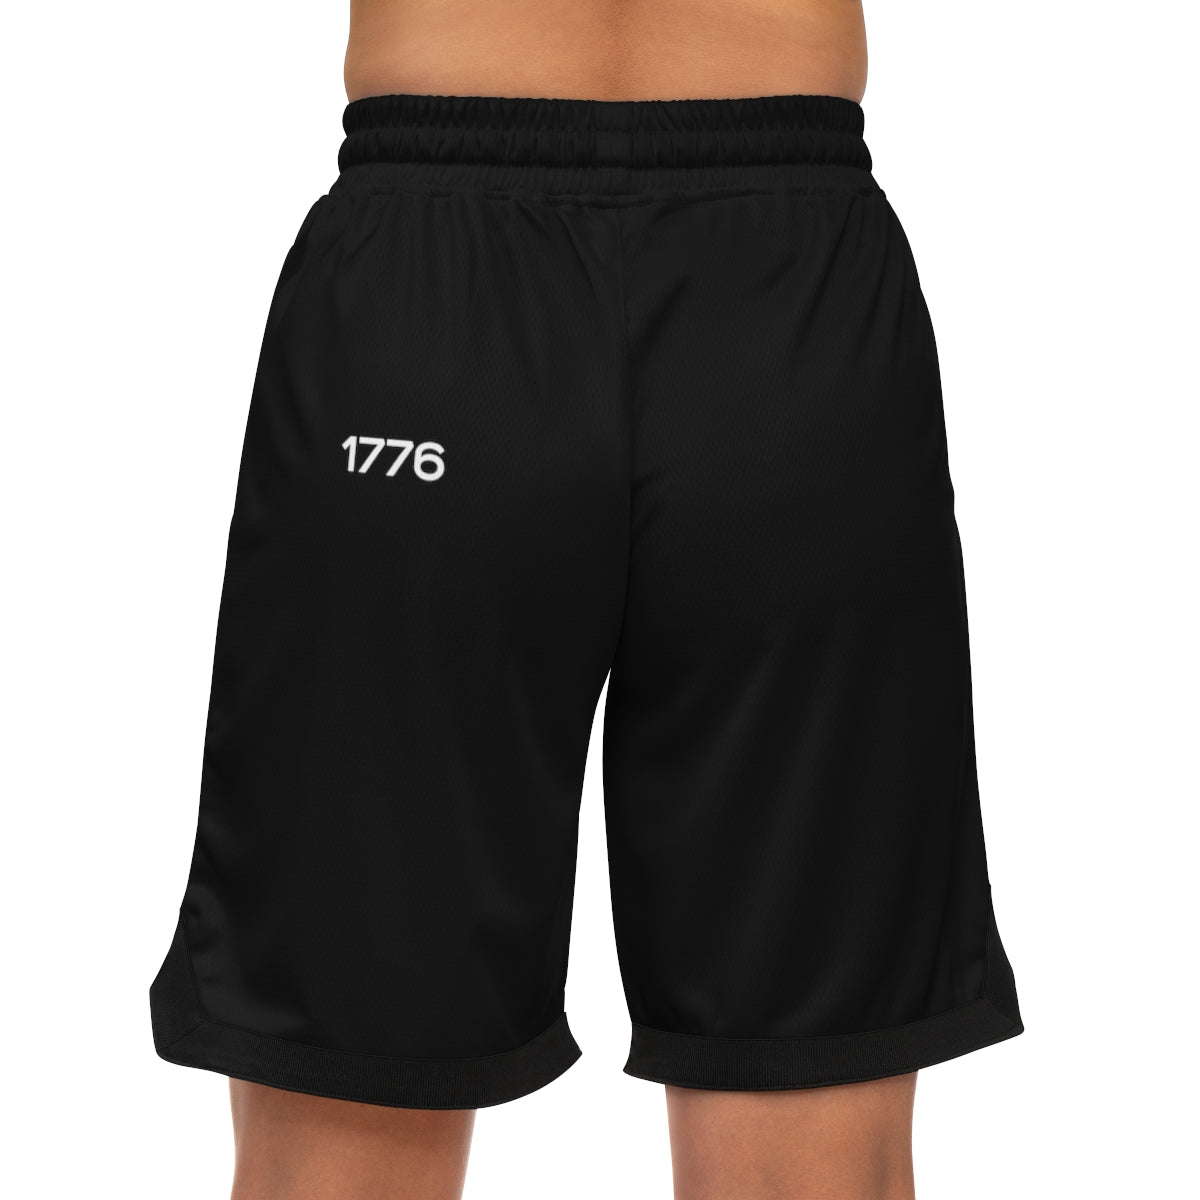 Free Eagle Basketball Shorts - Freedom First Supply